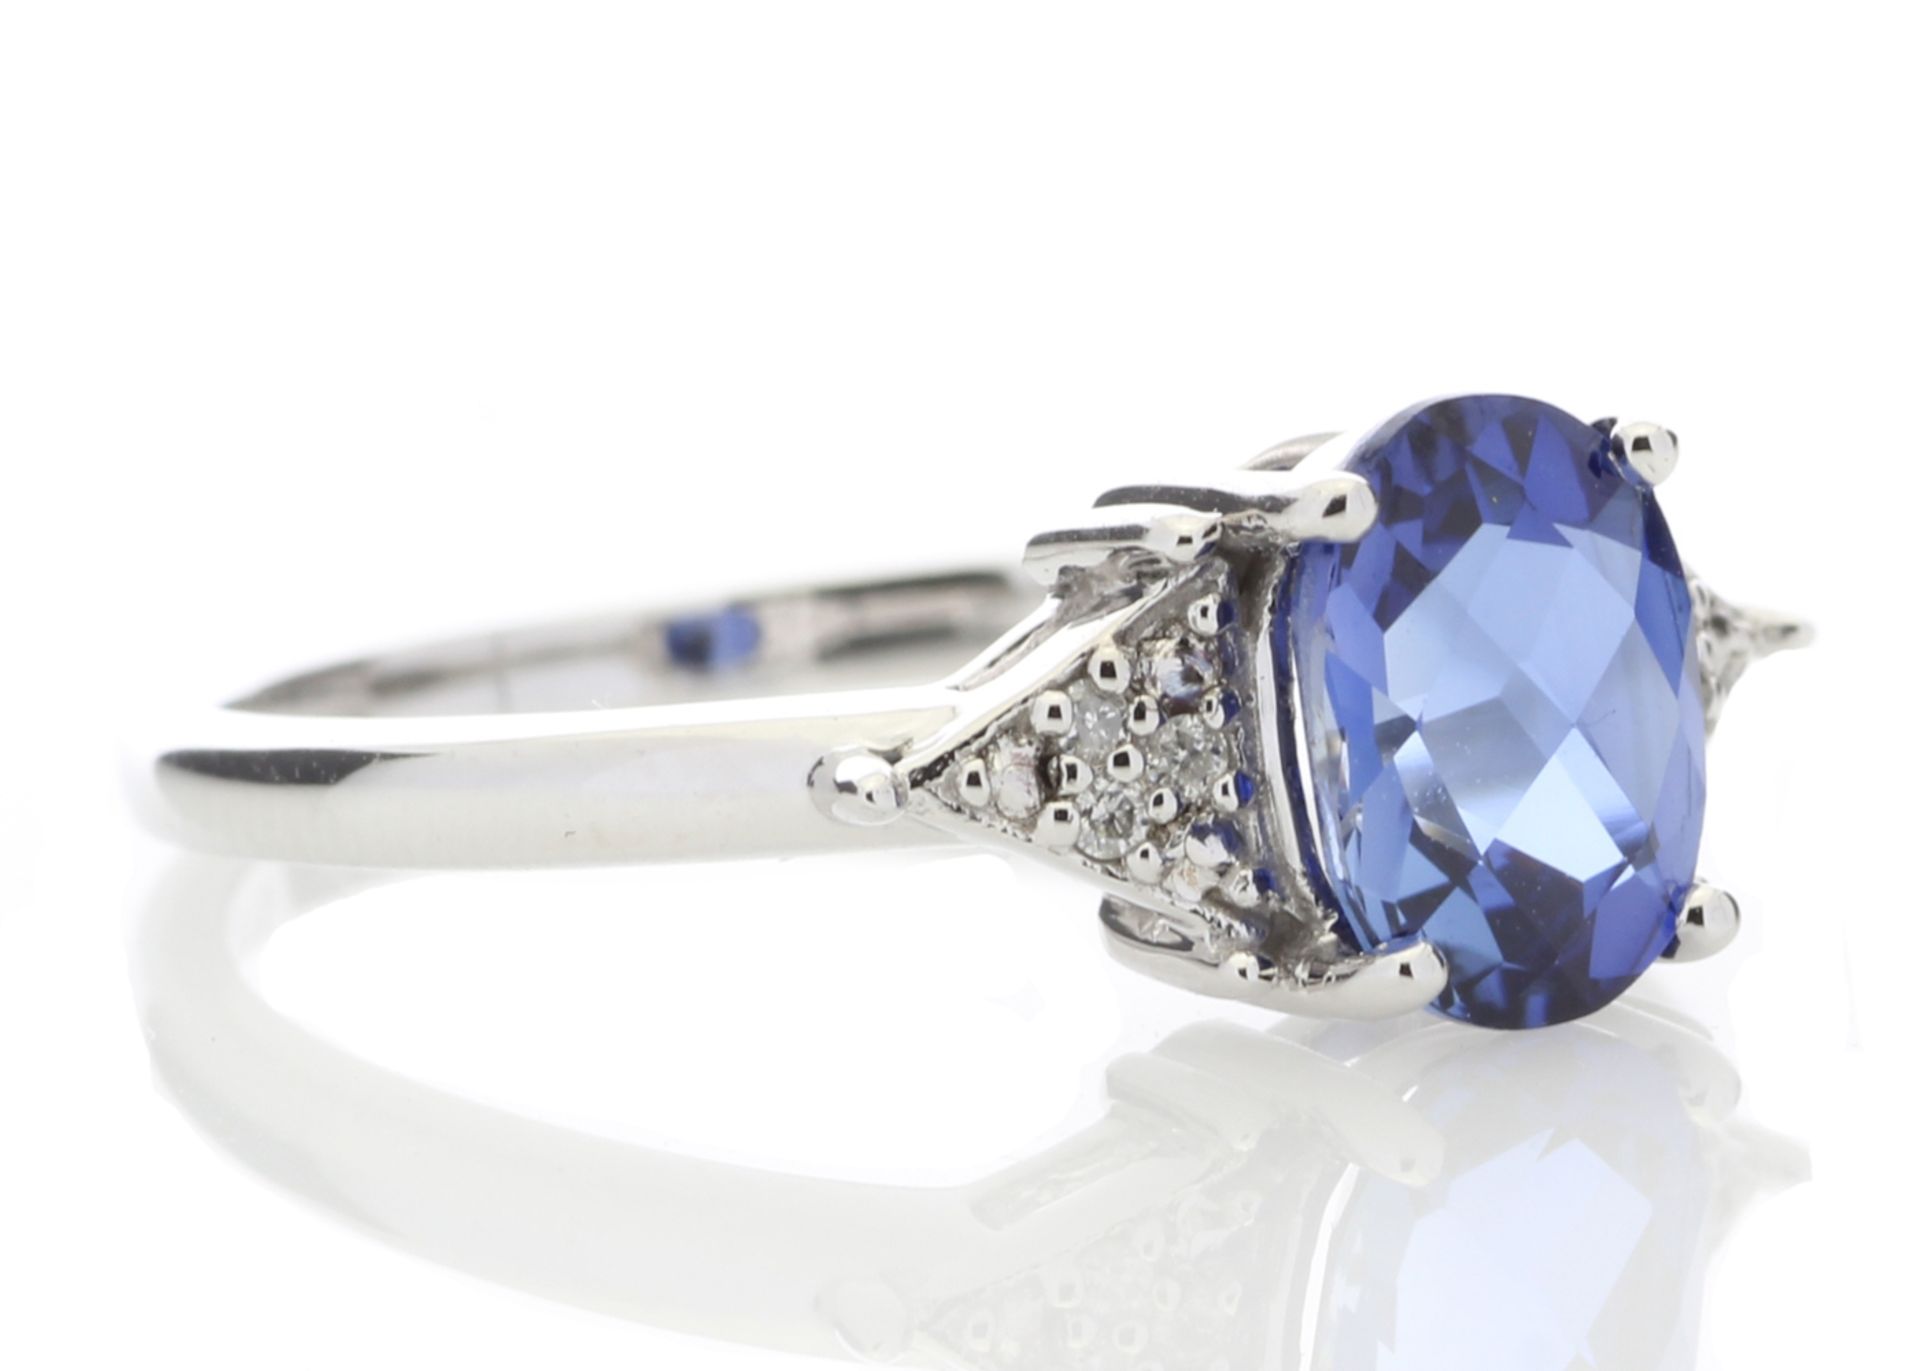 9ct White Gold Created Ceylon Sapphire and Diamond Ring (0.03) 1.67 Carats Carats - Valued by GIE £ - Image 4 of 5